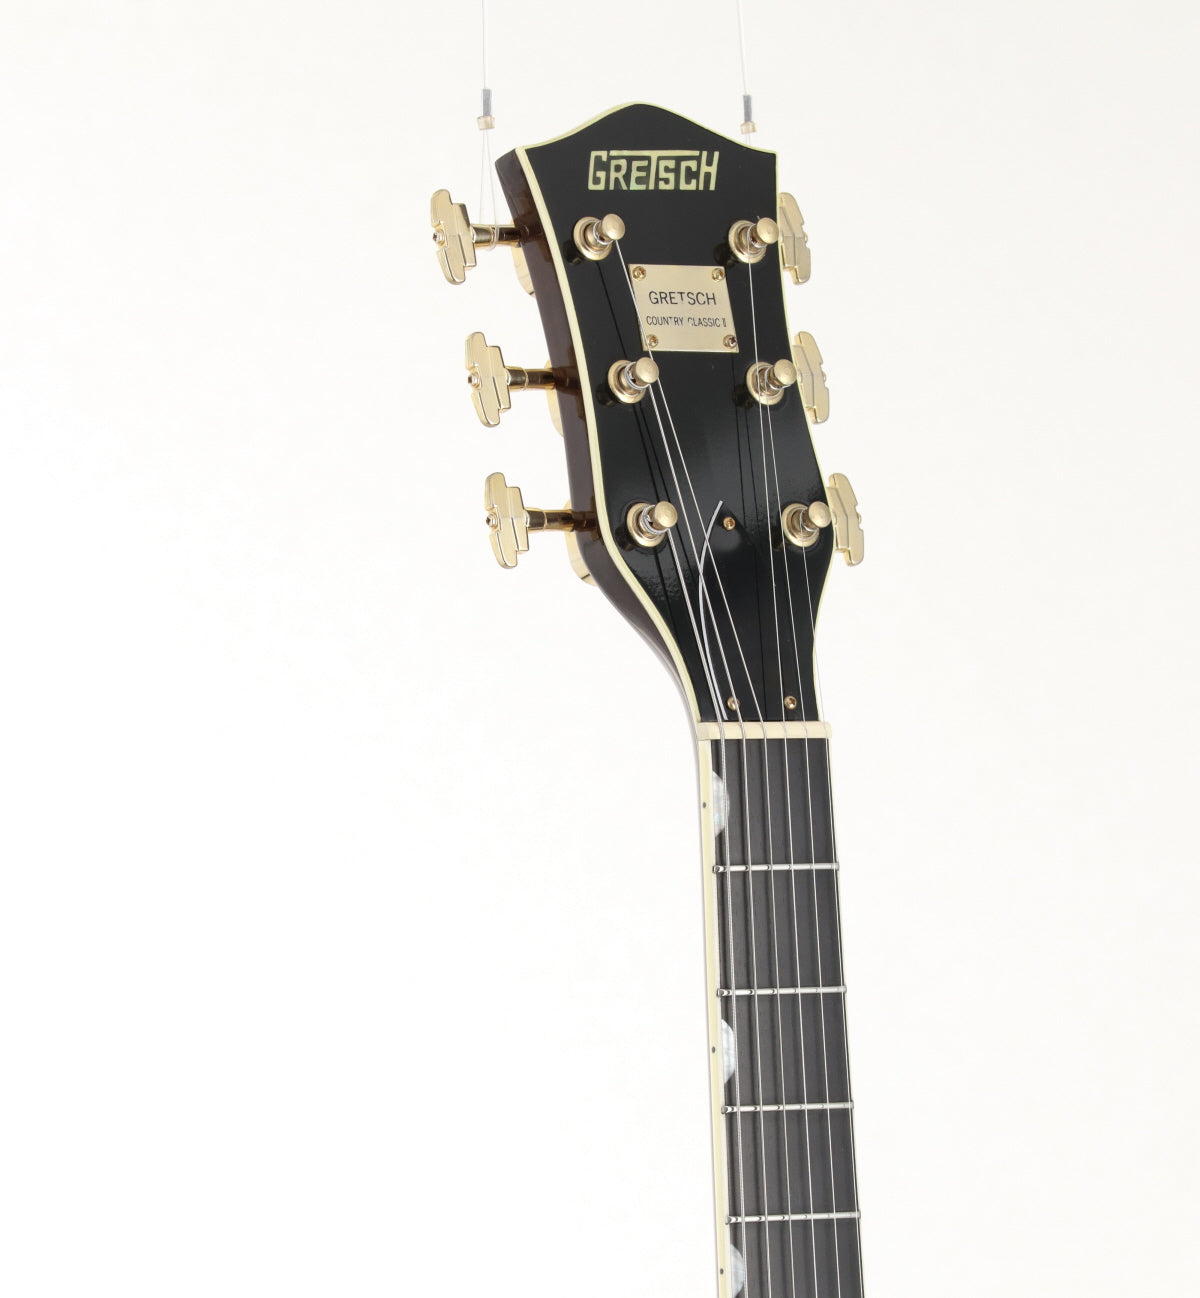 [SN 8910122-148] USED Gretsch / 6122 Country Classic II Modified 1989 [09]